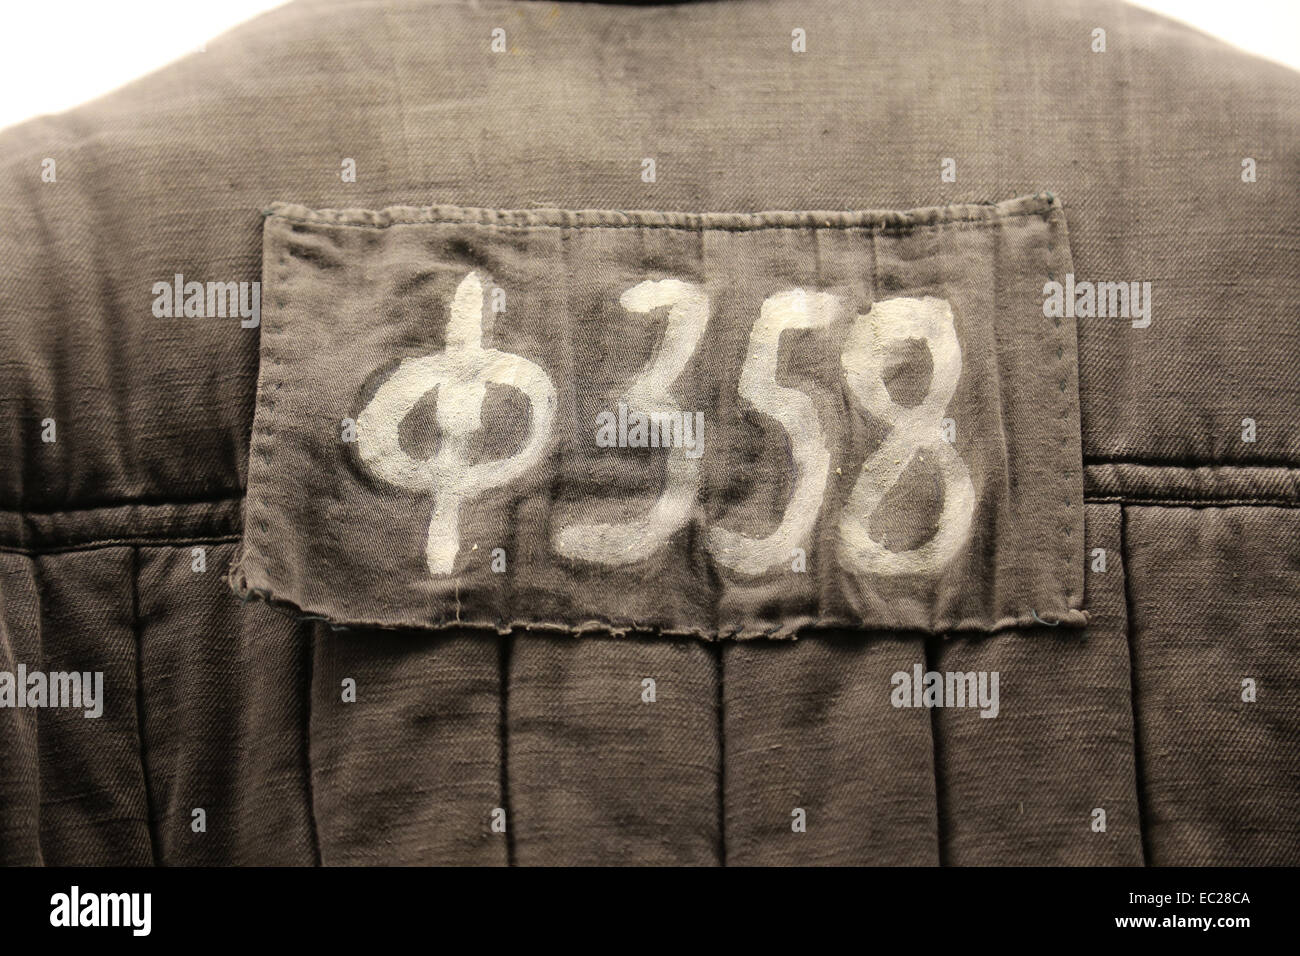 Gulag, Soviet forced labor camp. Prisoner's jacket, each deportee had an identification number assigned to them. Latvia. Stock Photo